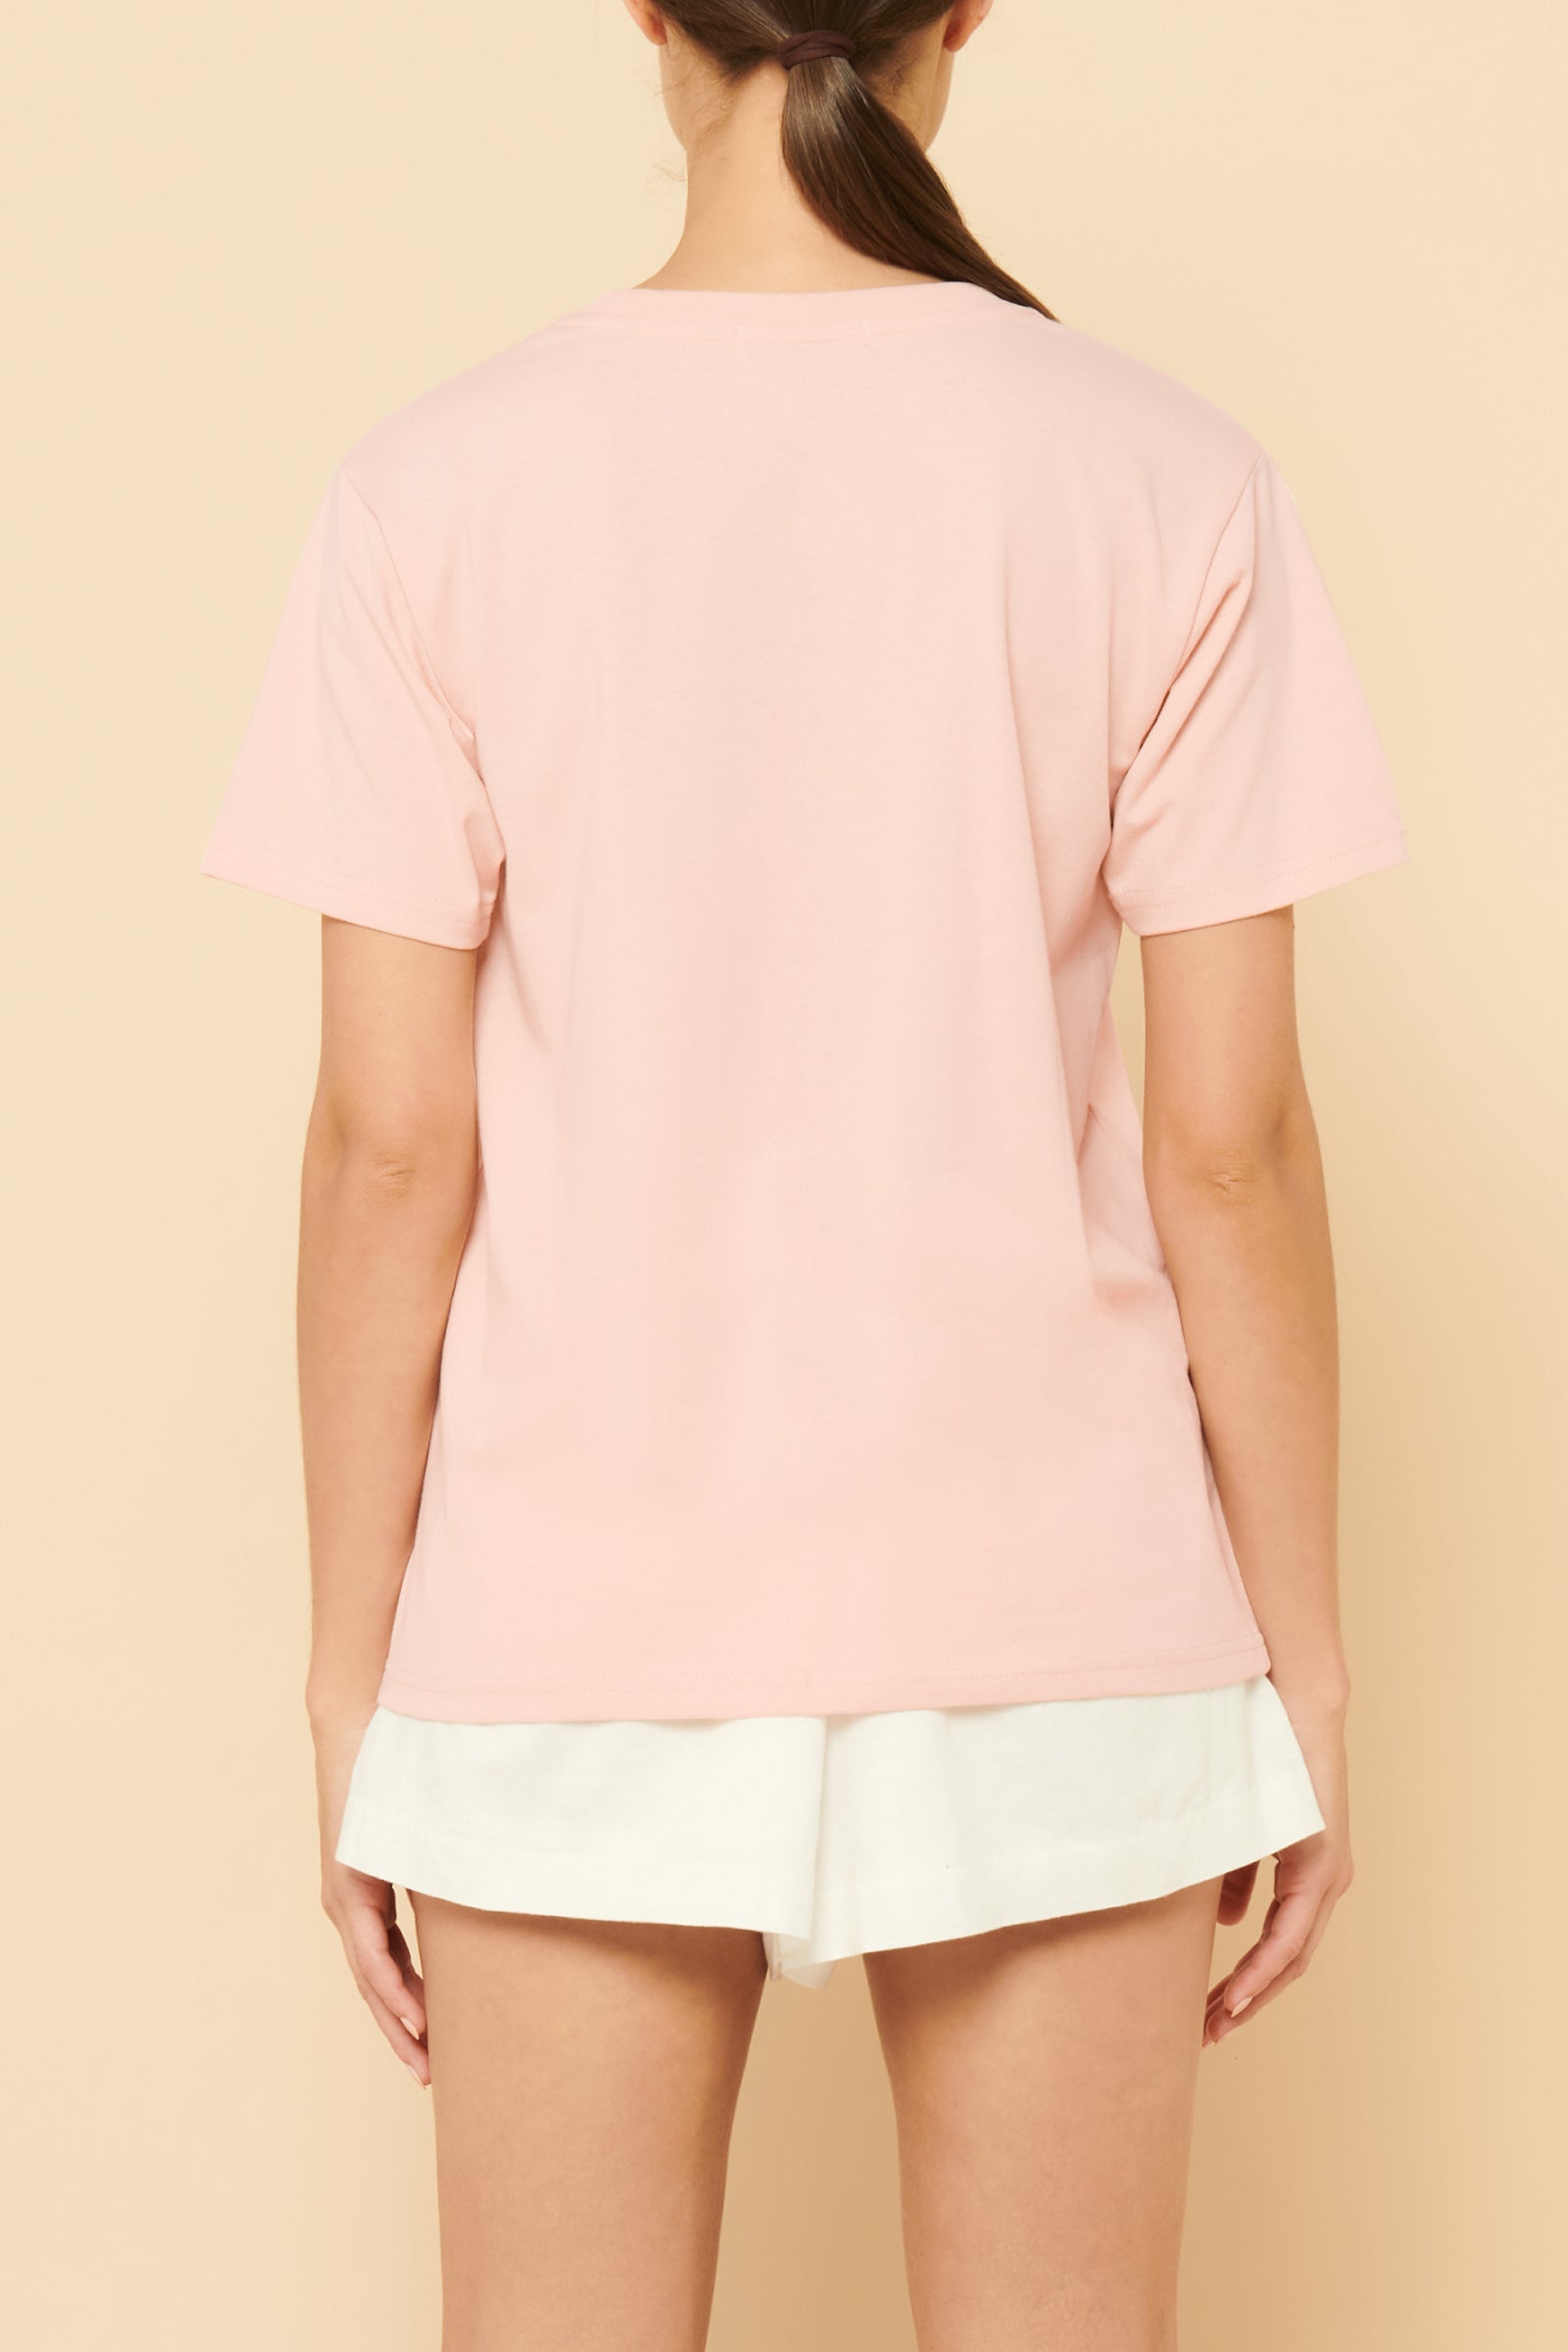 Nude Lucy Nude Organic Heritage Tee Mineral In Pink 